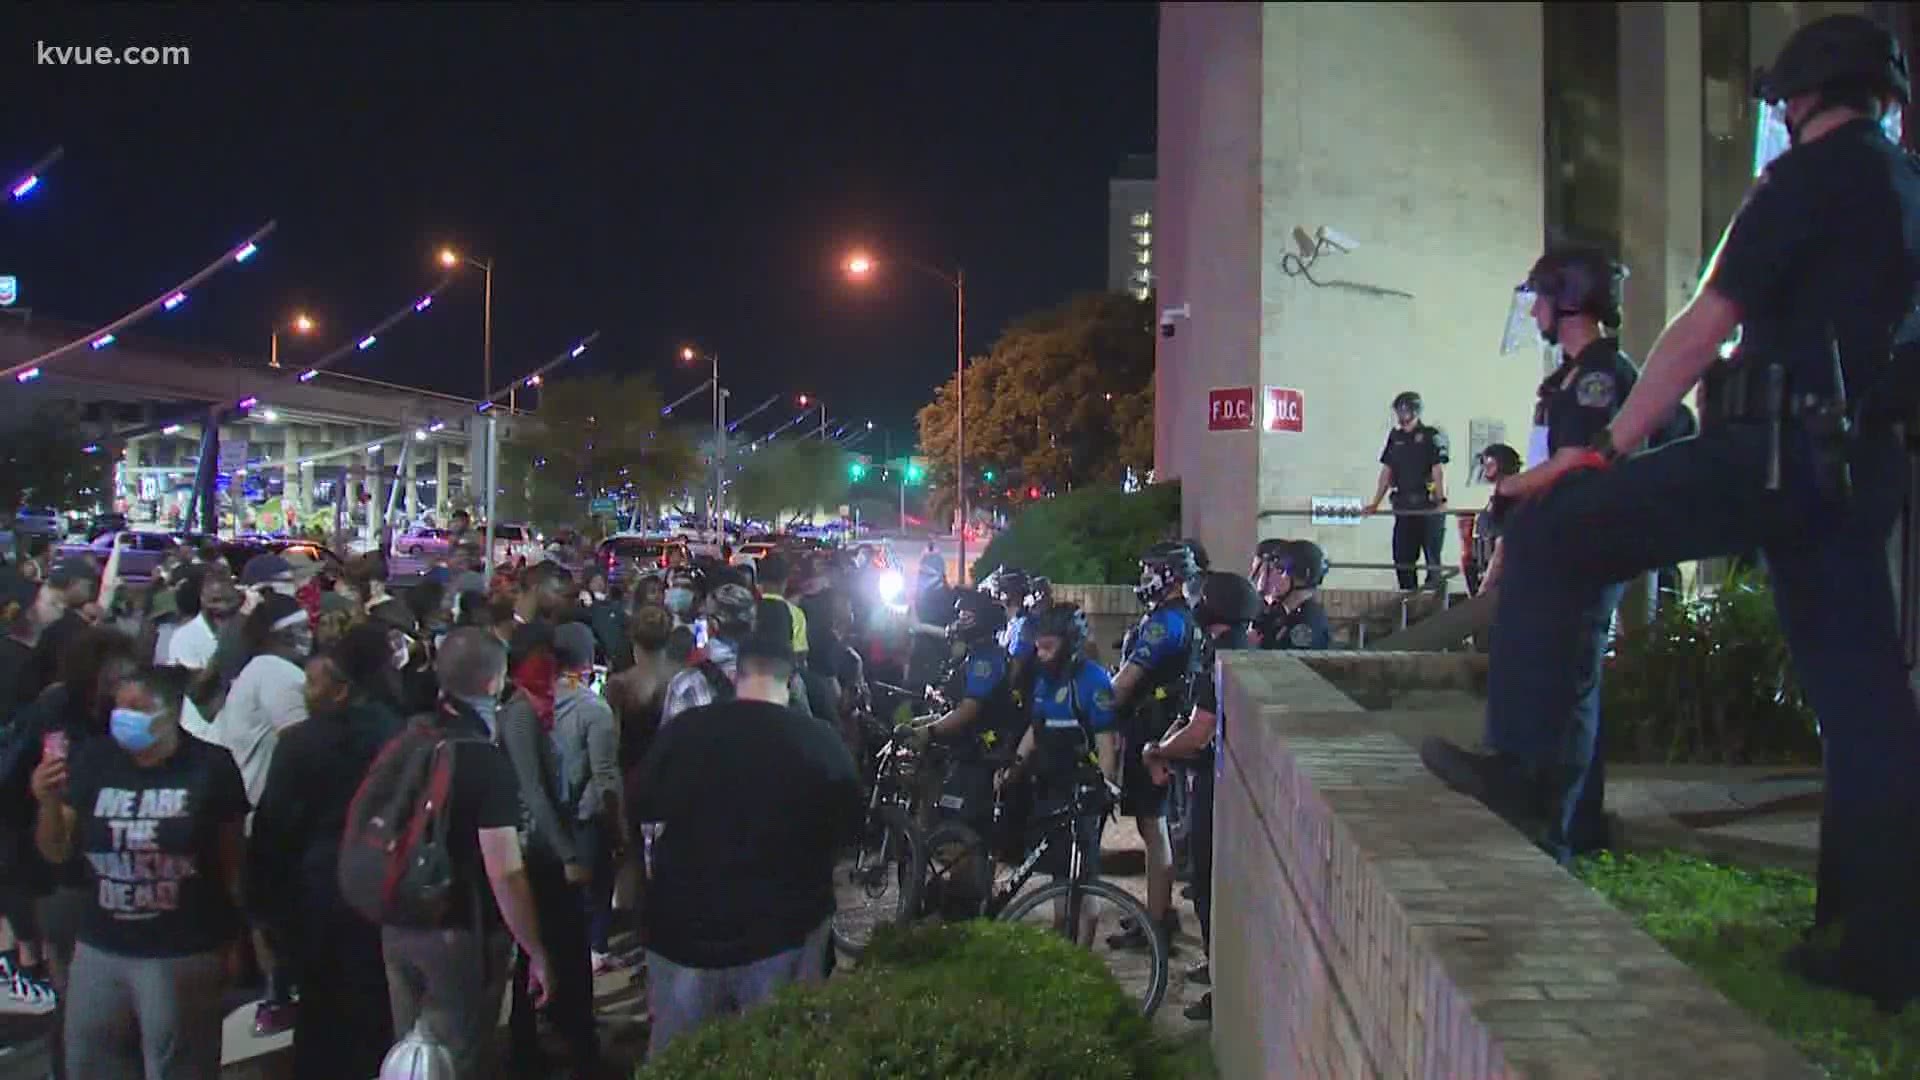 Tensions were high outside the Austin Police Department headquarters Friday night, as people gathered to protests the deaths of George Floyd and Michael Ramos.